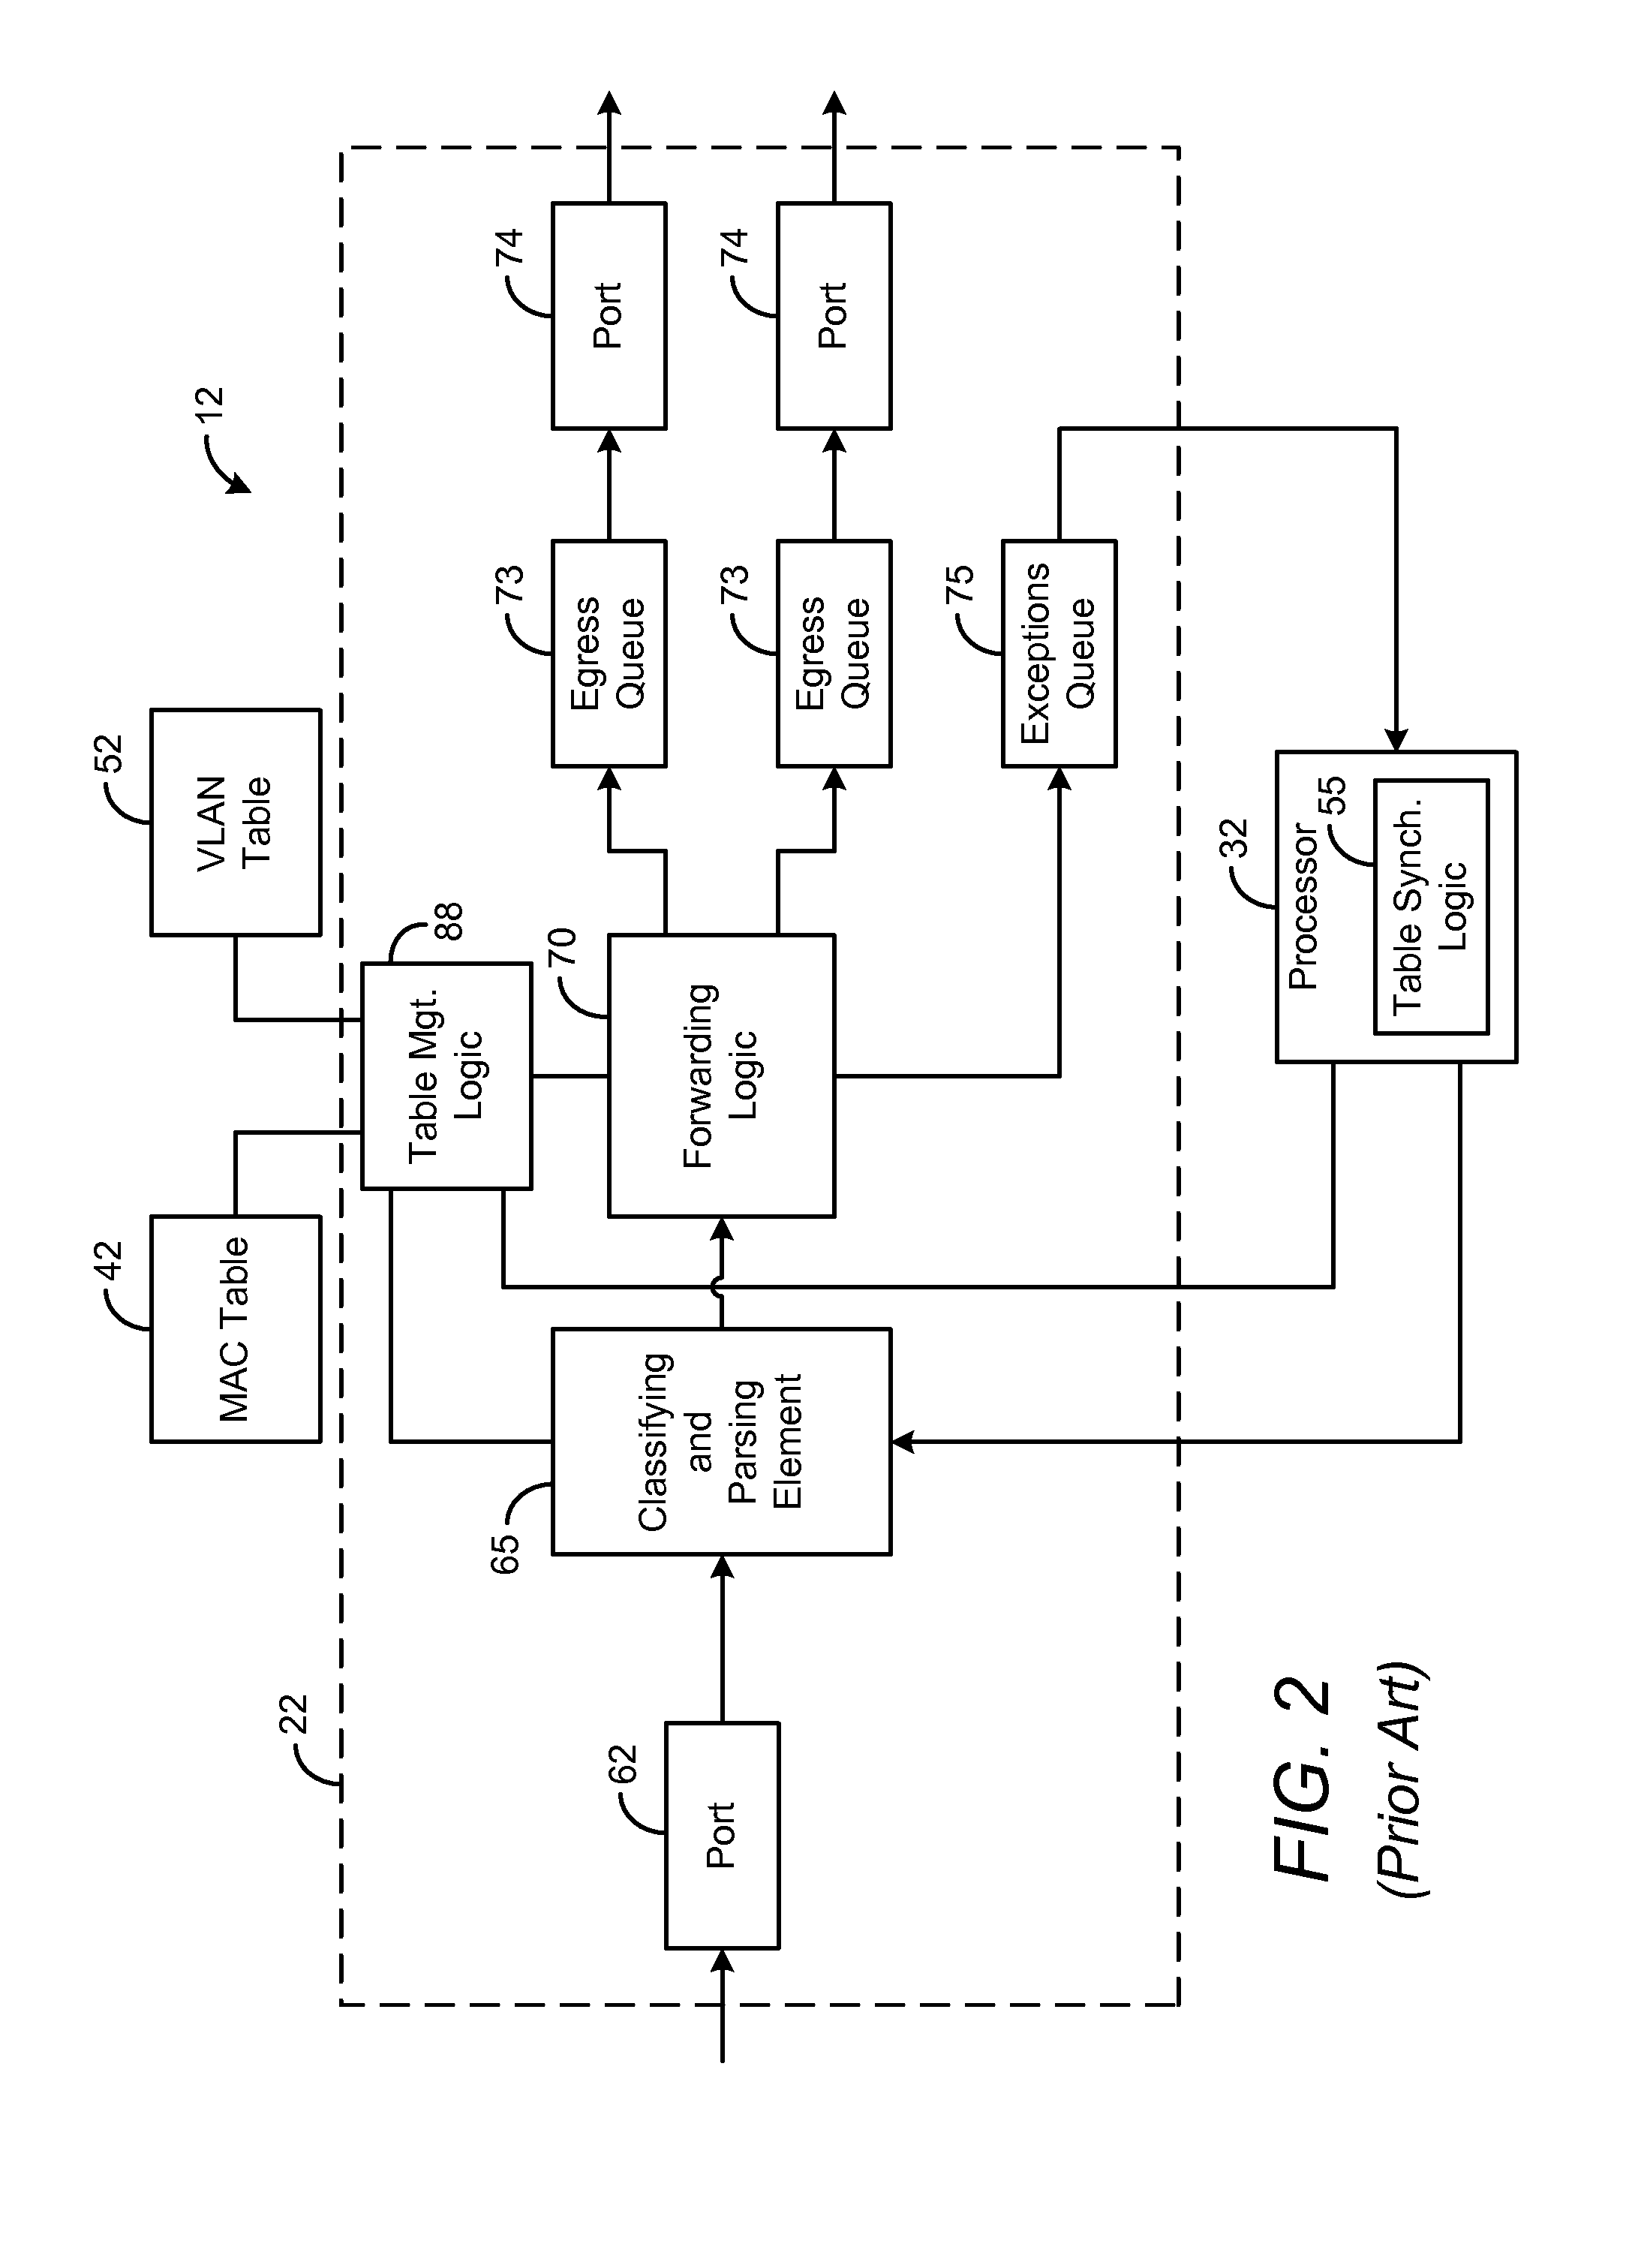 Systems and methods for disseminating addresses in distributed switching environments